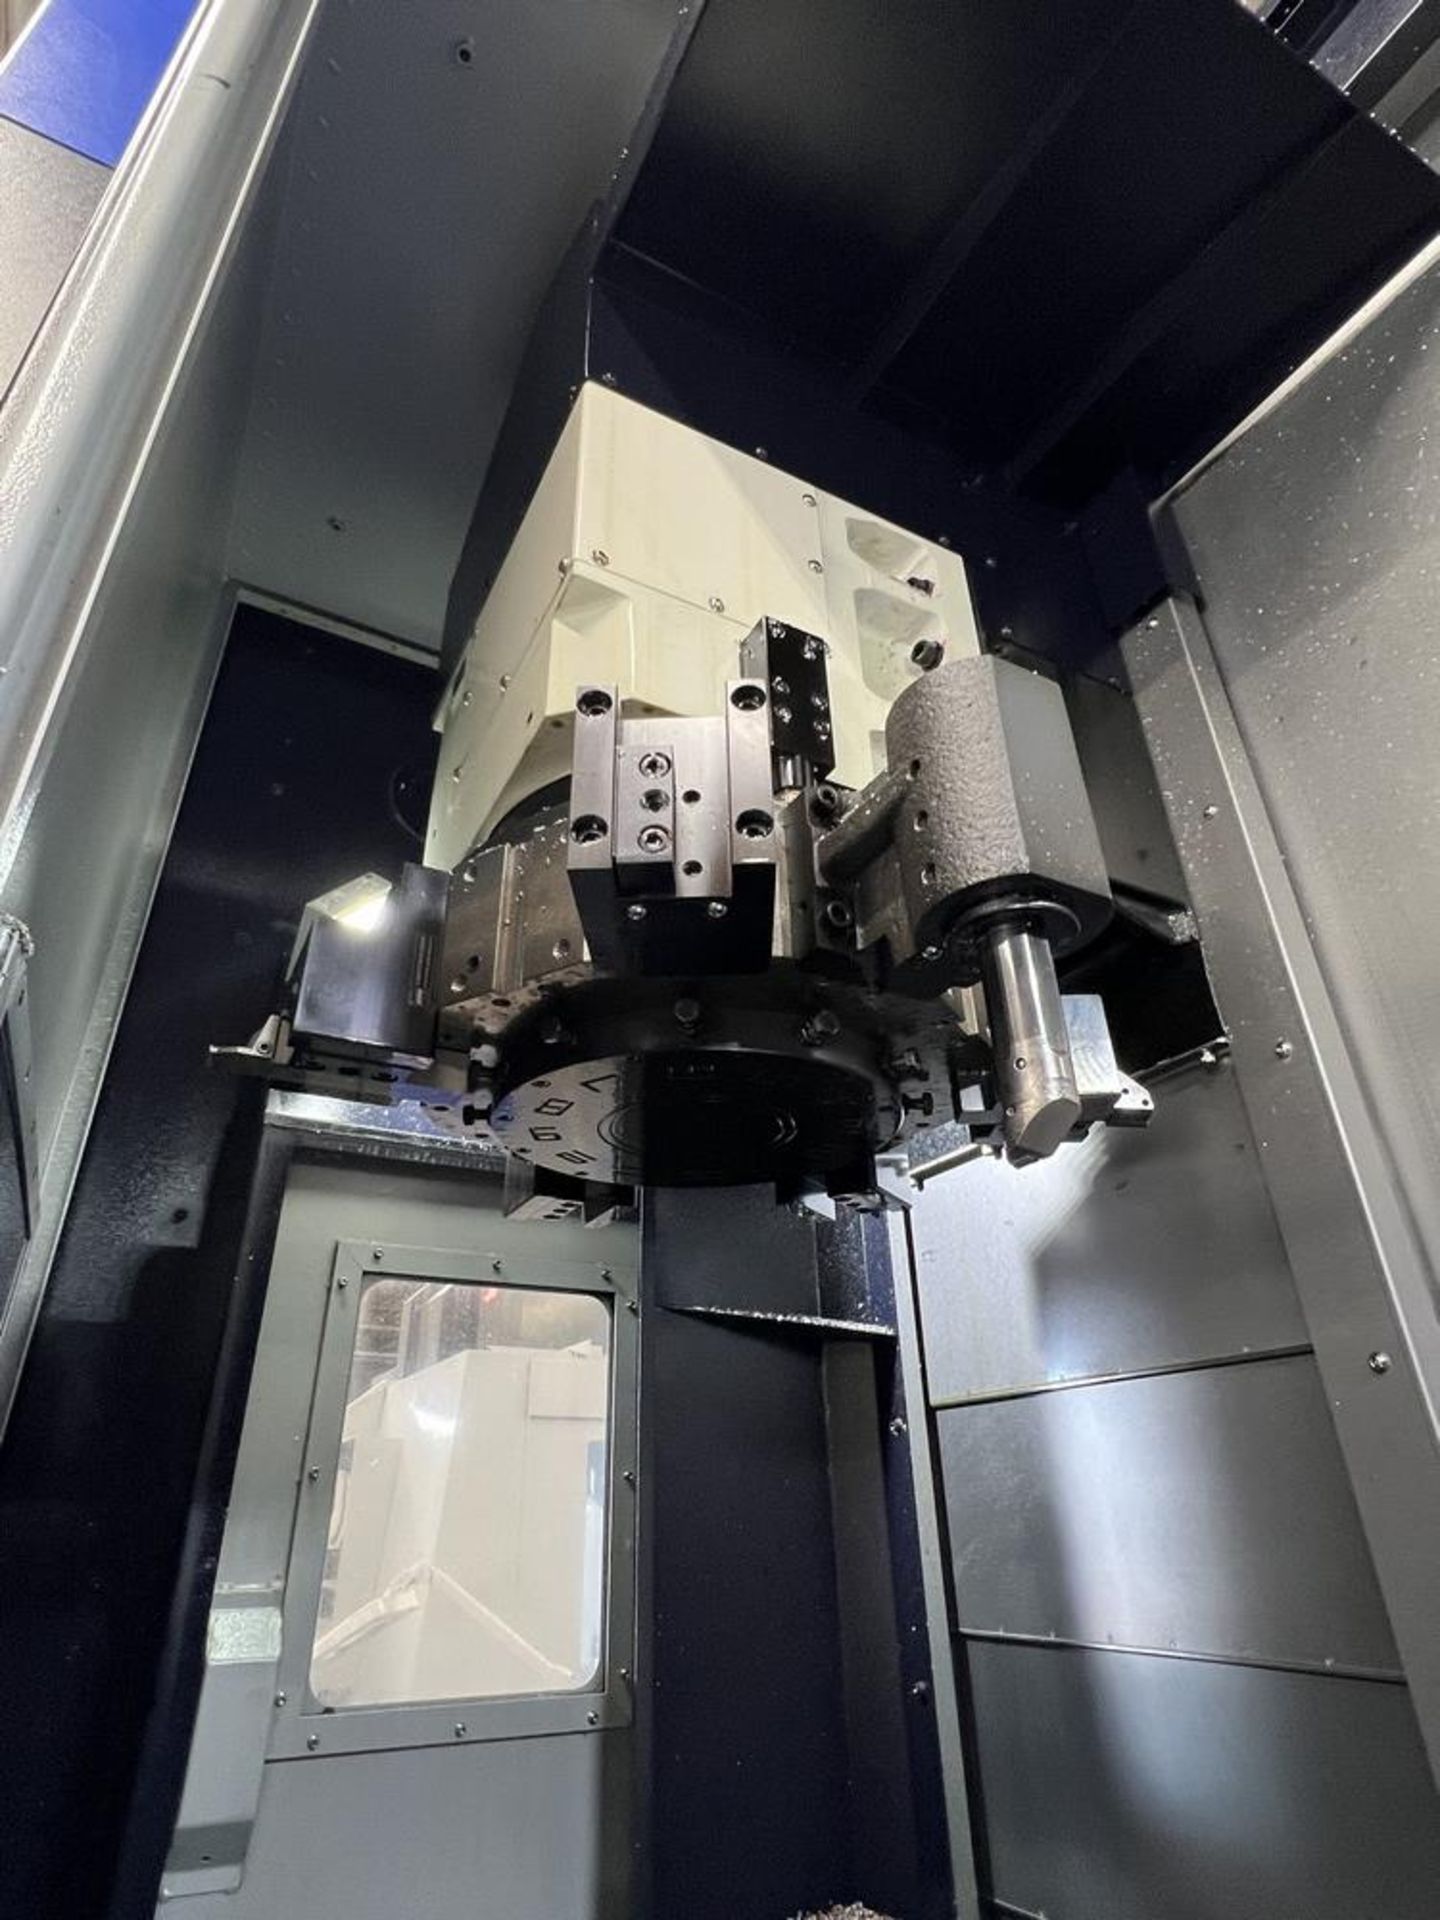 2022 Hwacheon VT-650L, 1500 RPM, 24" Chuck, 12 Station Turret, 35" Max Swing, Max. Turn Height 29. - Image 24 of 28